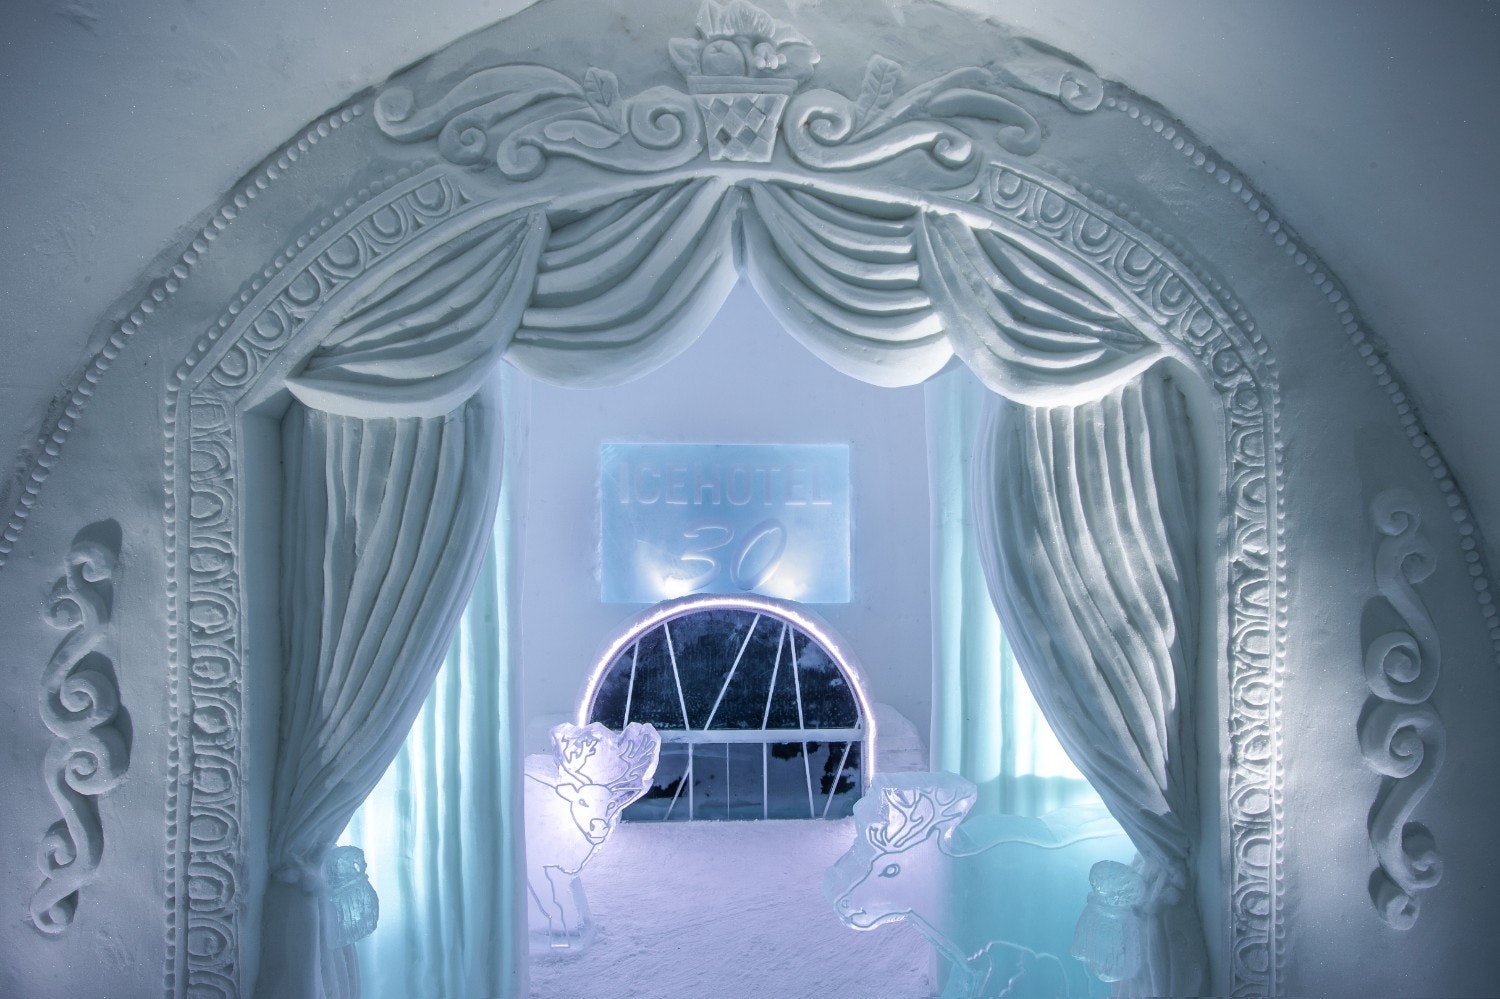 A Night at the Theatre design at the Icehotel